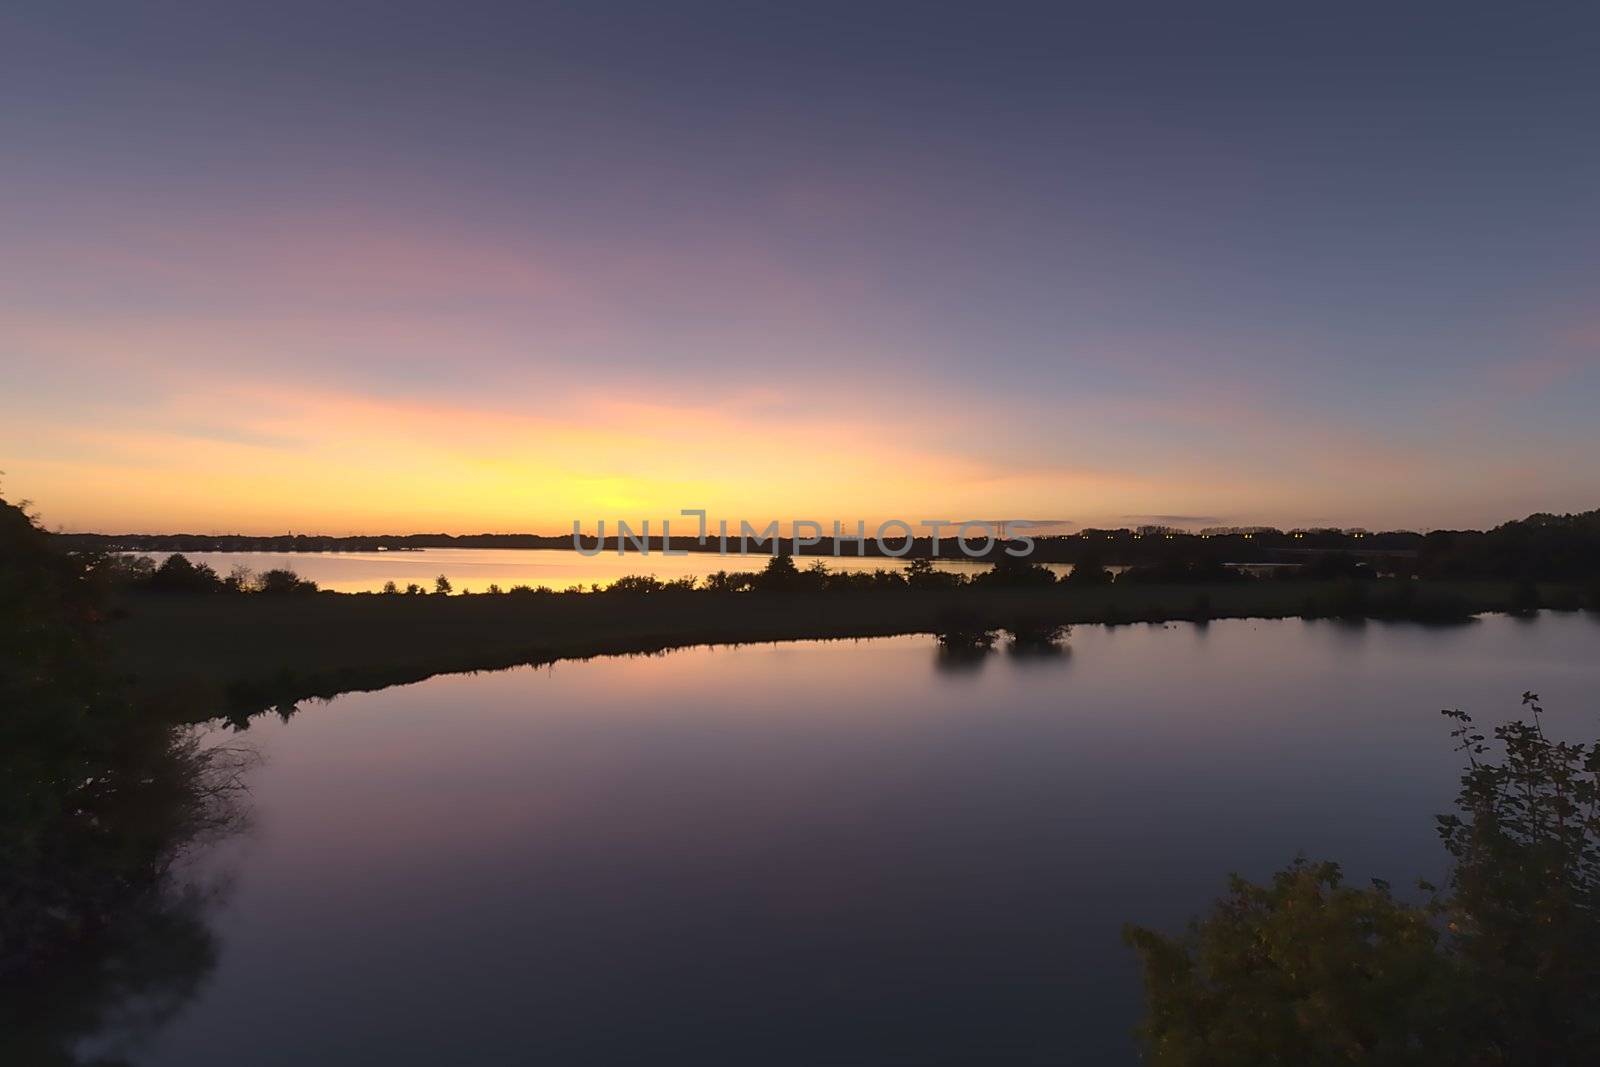 The evening skyline near Roermond, shot in the summer of 2019 in the evening.